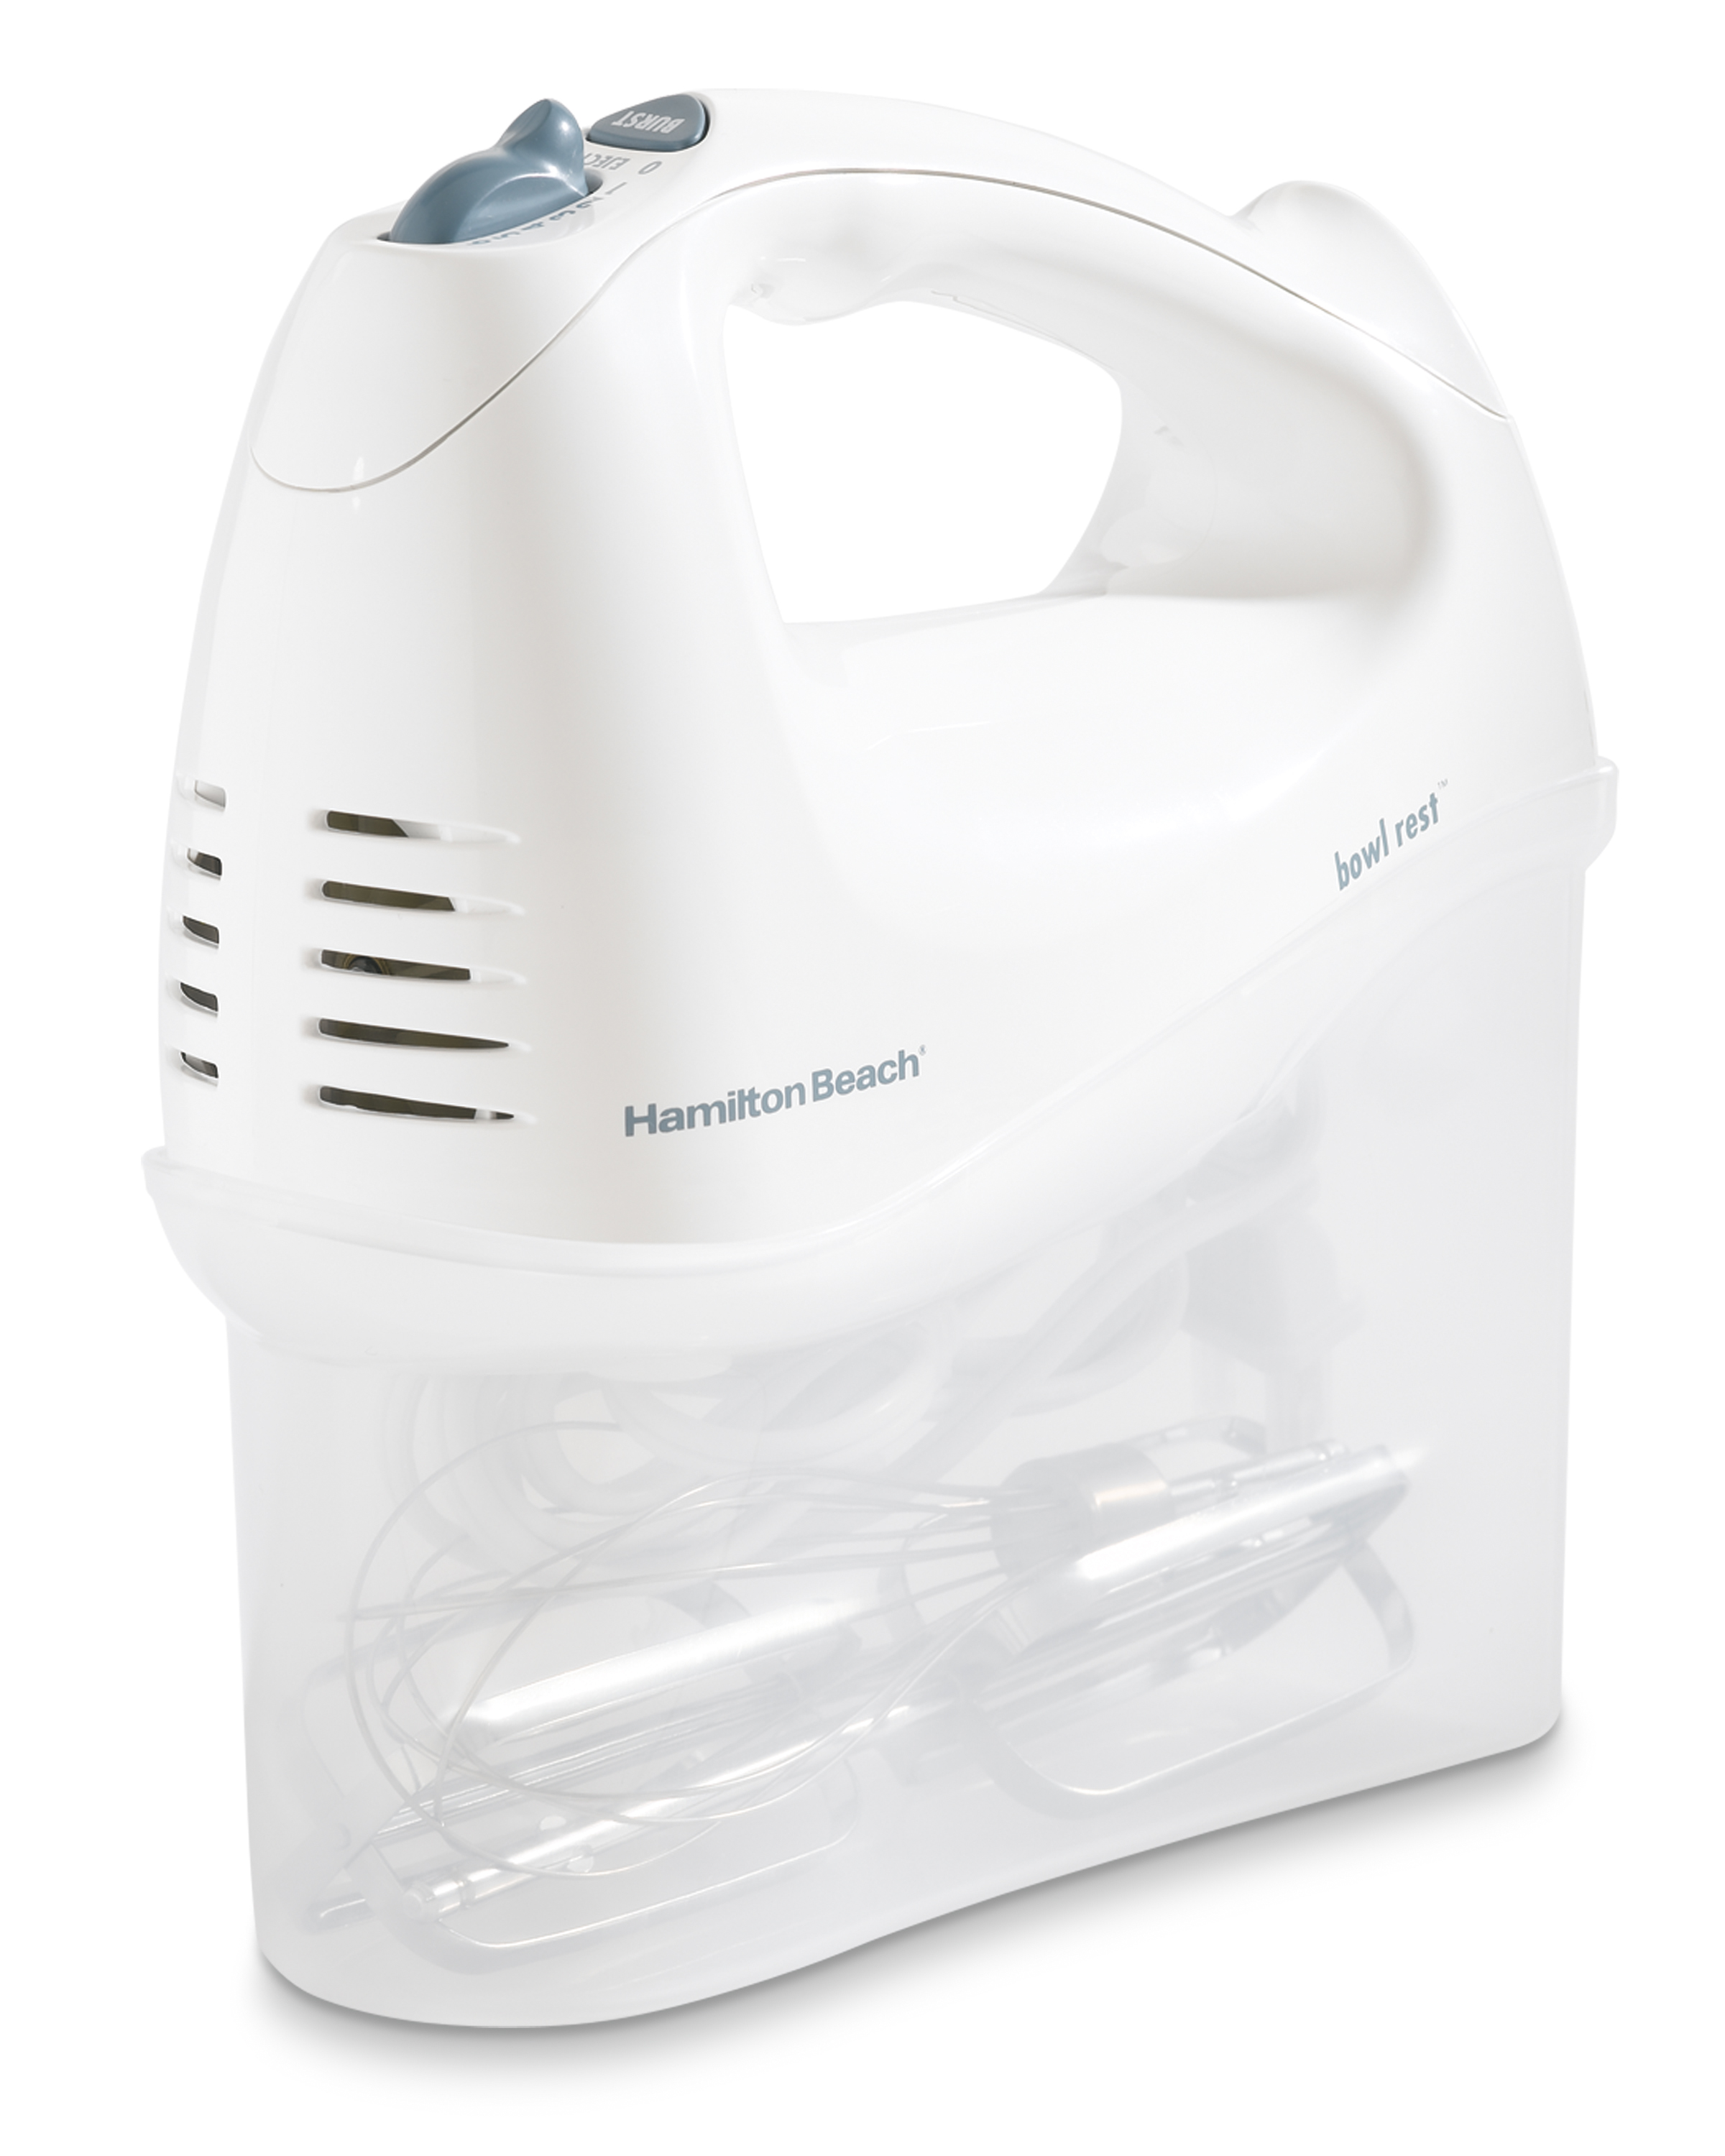 Hamilton Beach 6 Speed Electric Hand Mixer with Whisk, Traditional Beaters, Snap-On Case, 250 Watts, White, 62682 - image 3 of 4